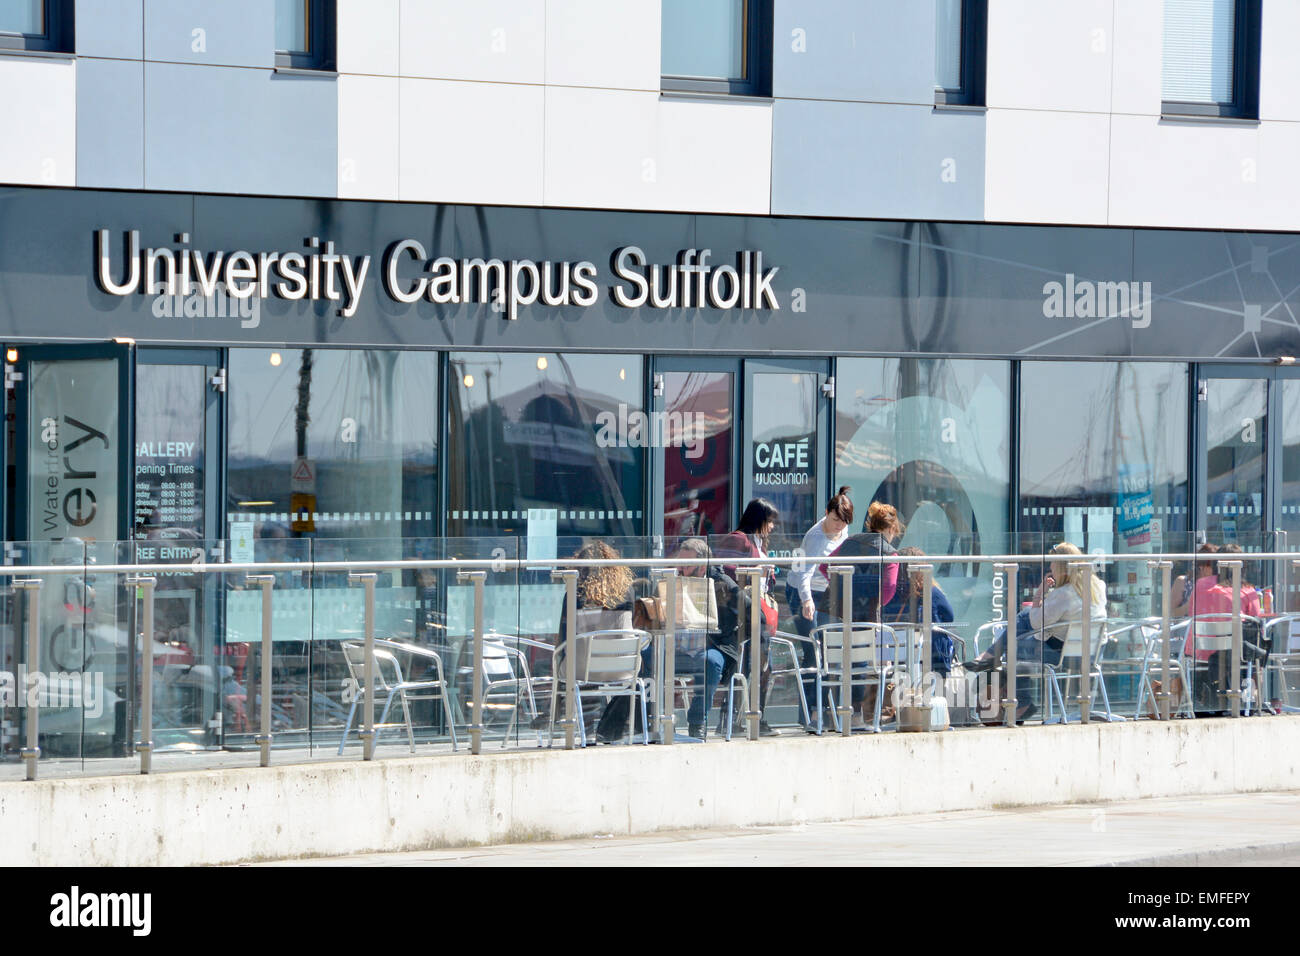 Students and visitors at University Campus Suffolk outdoor waterfront café tables and entrance to Gallery Ipswich England UK Stock Photo